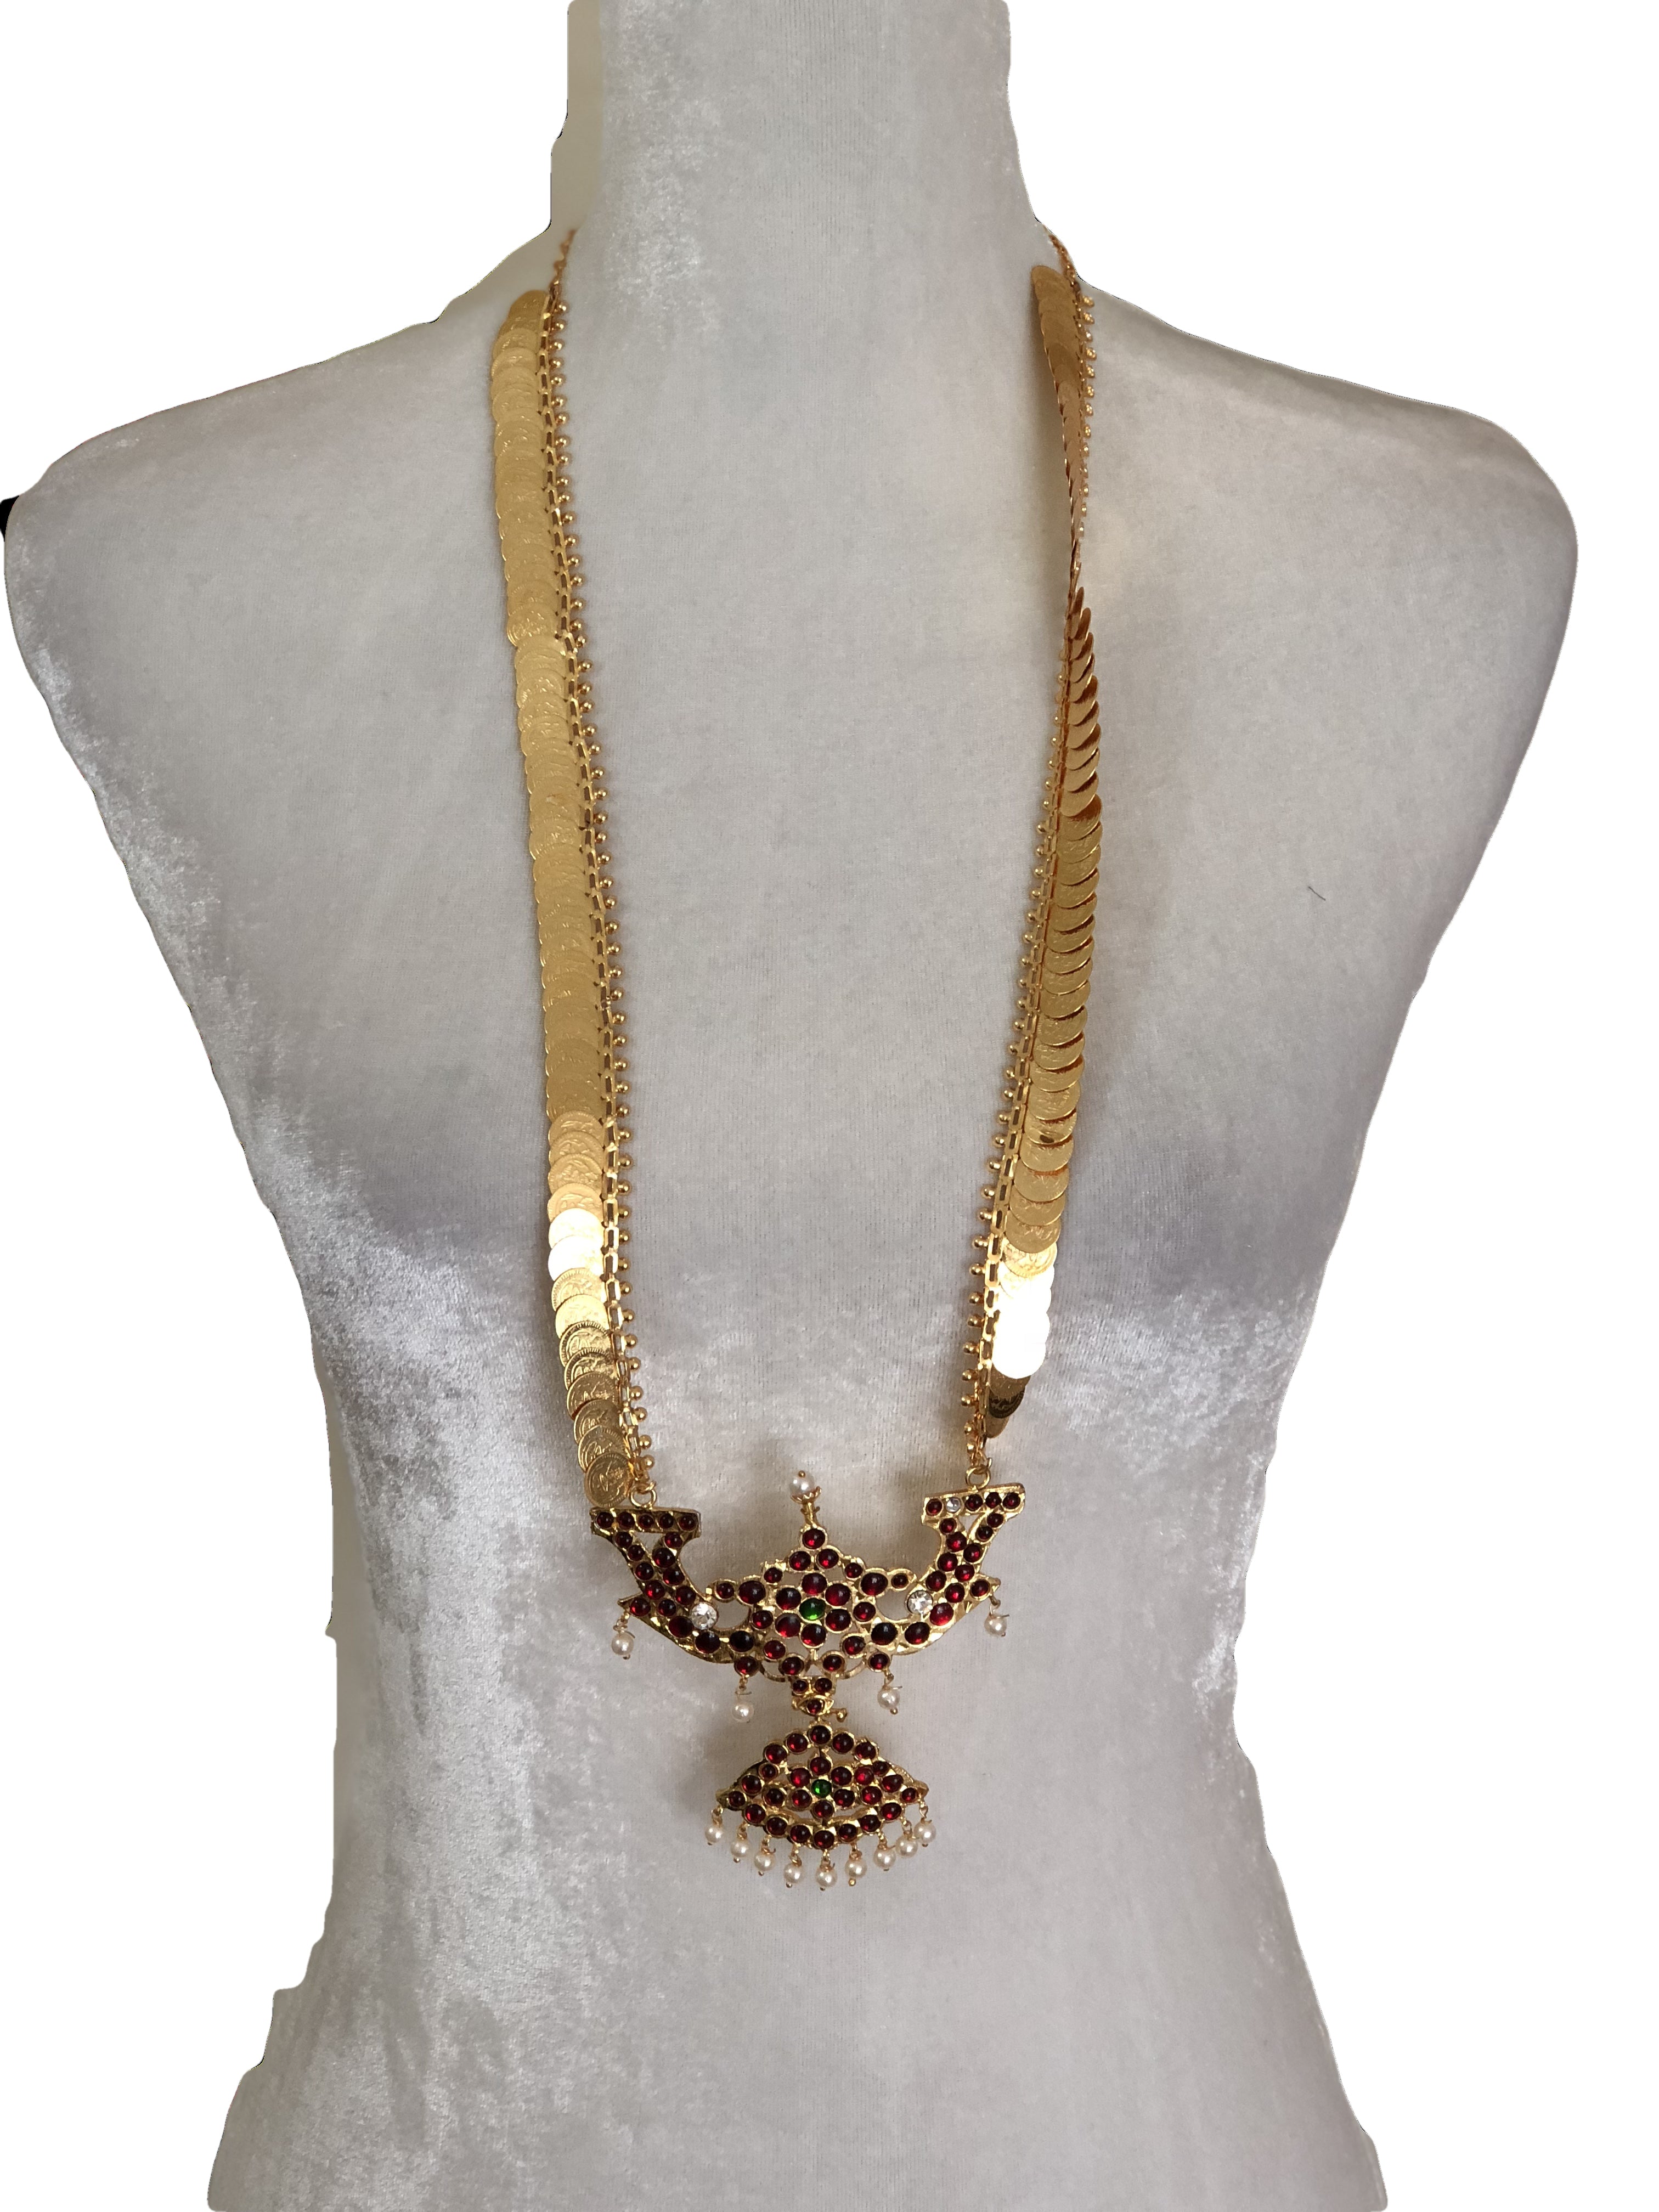 Goddess Laxmi Coin - Gold Plated Long Necklace - Gold Plated Pendant with Kemp stones and White Pearl Beads